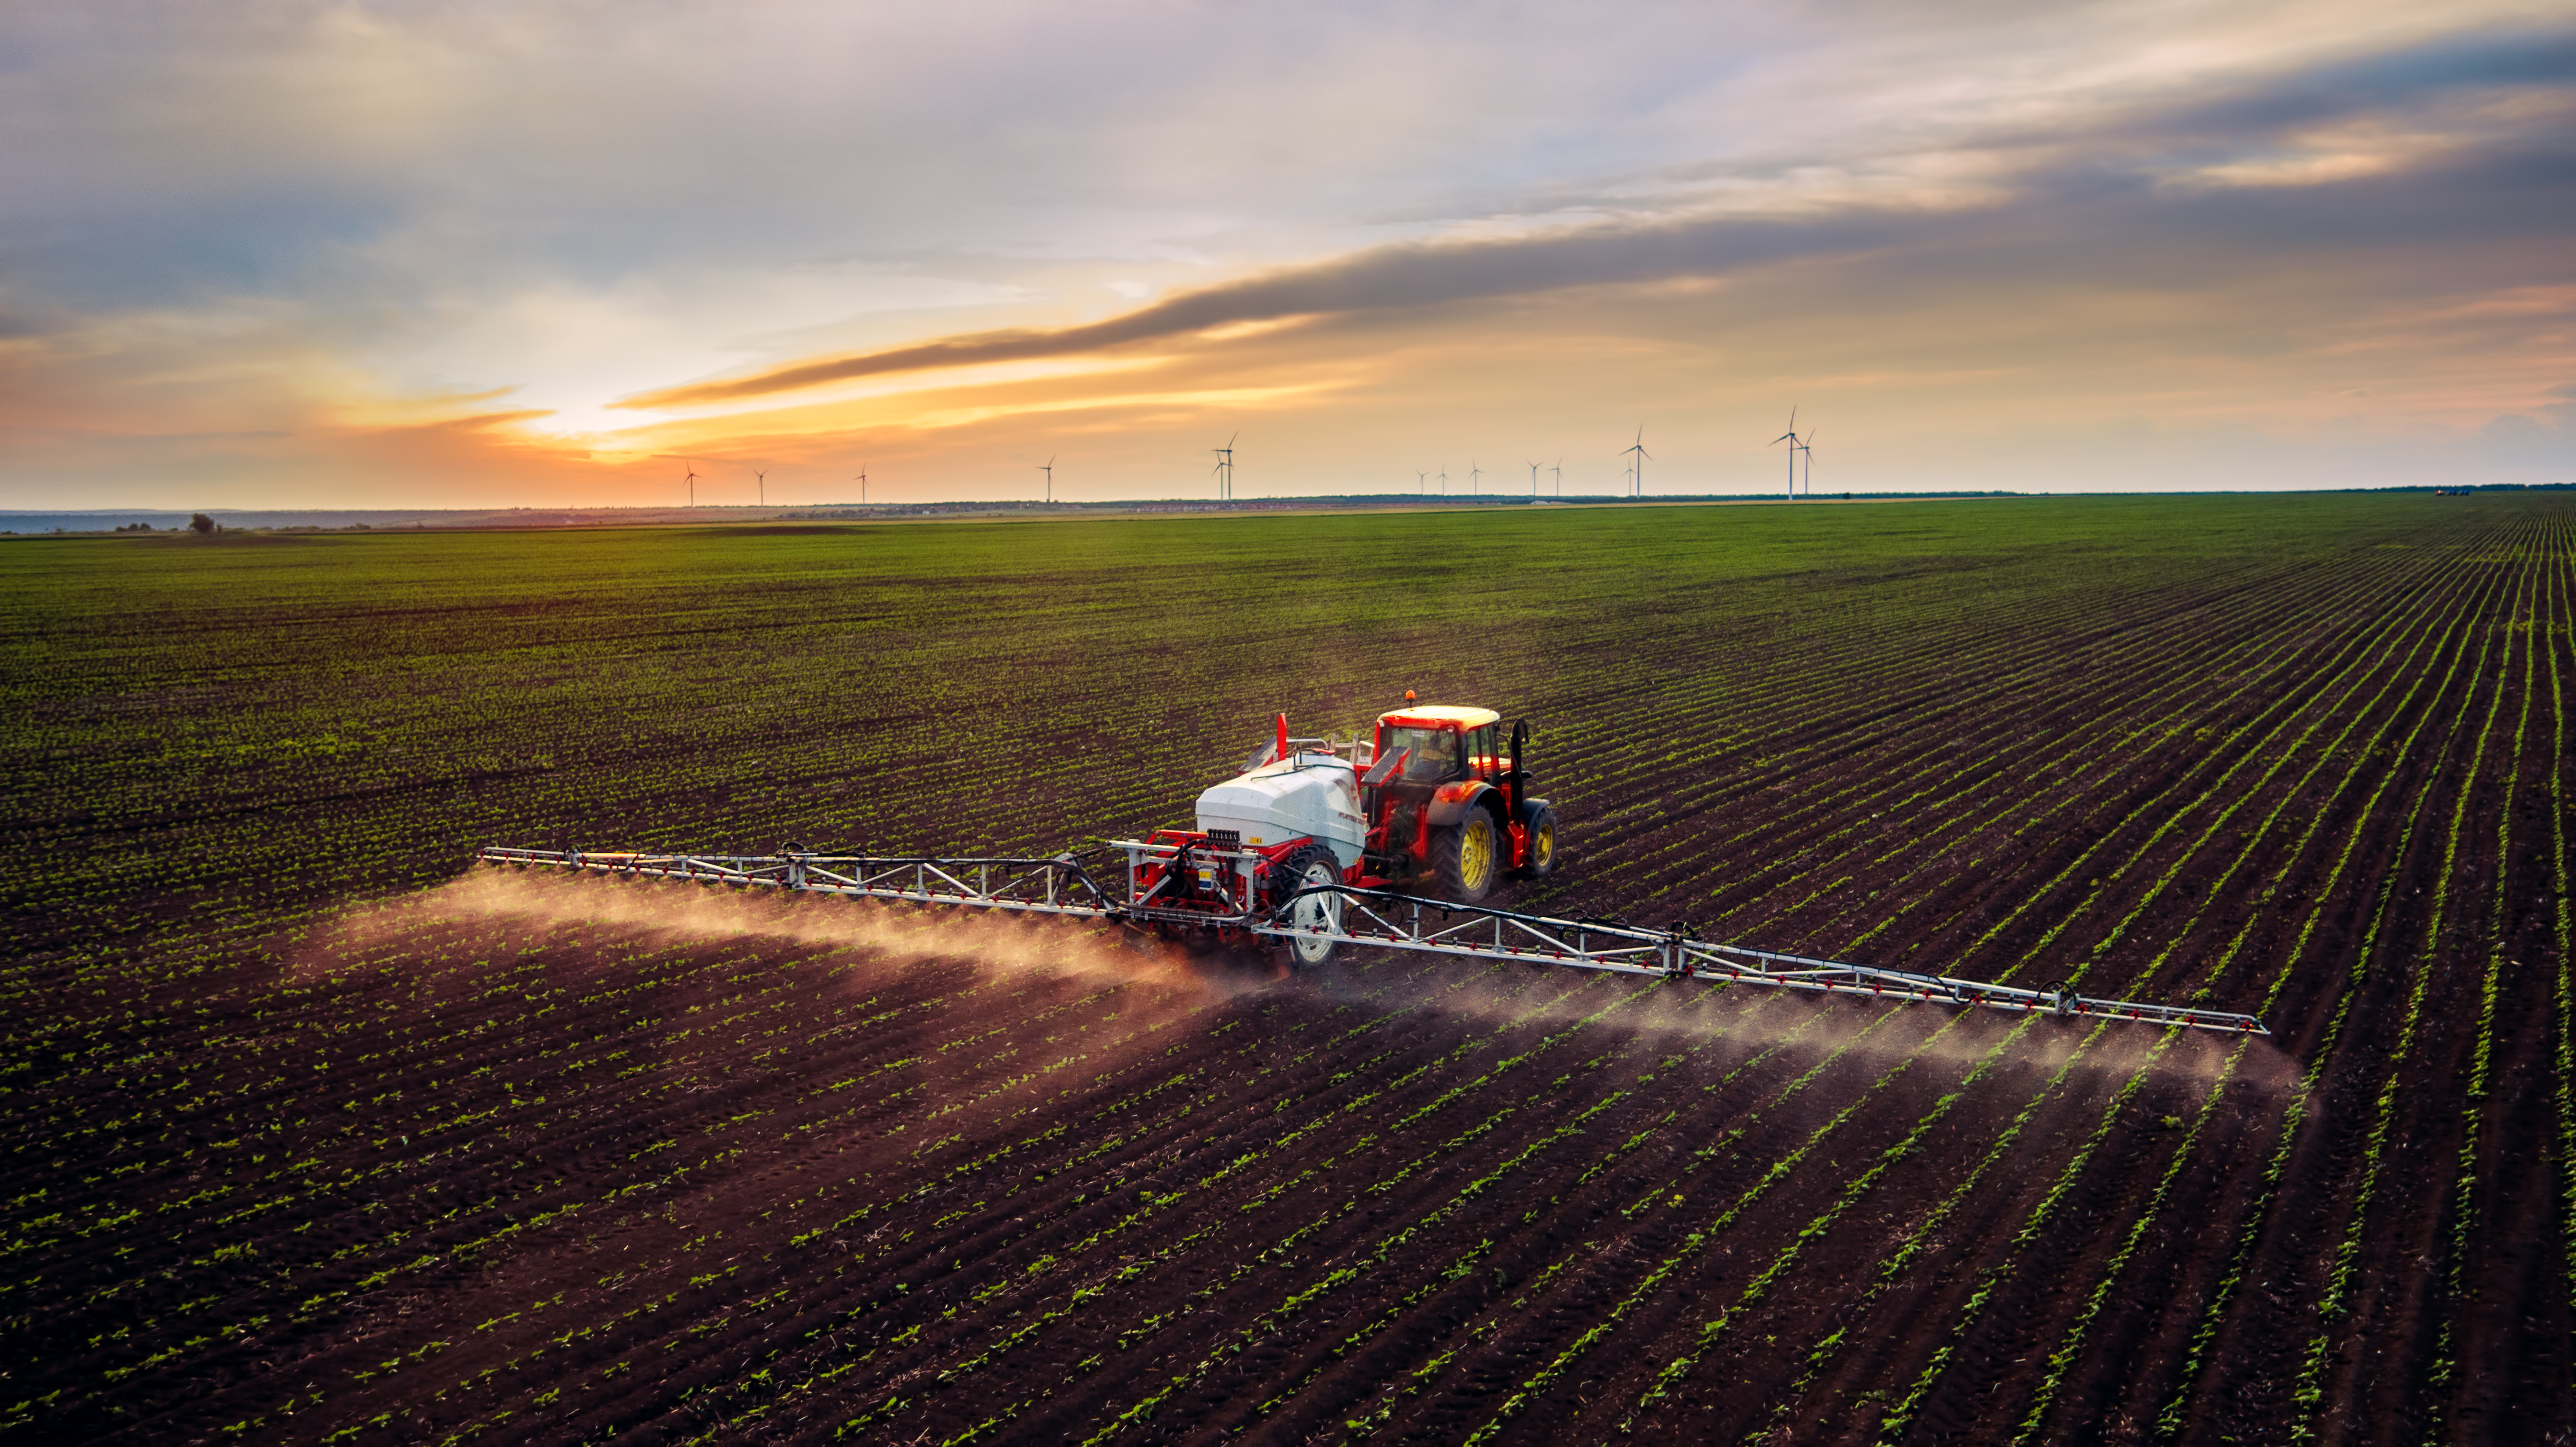 large multi-row sprayer adding chemicals to a field